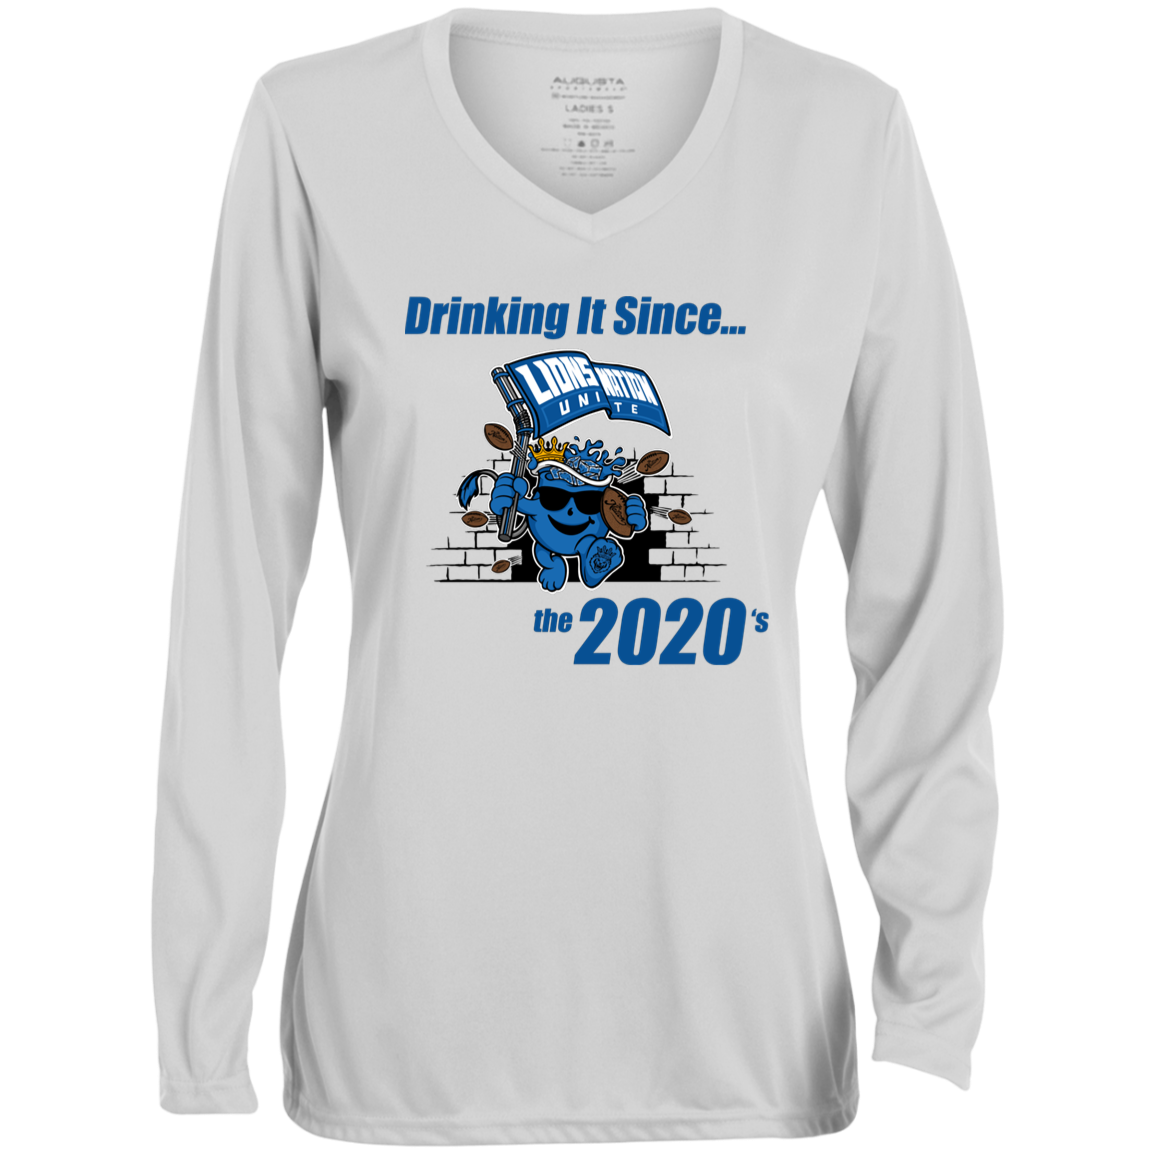 Drinking It Since the 2020's Women's Long-Sleeved T-Shirt